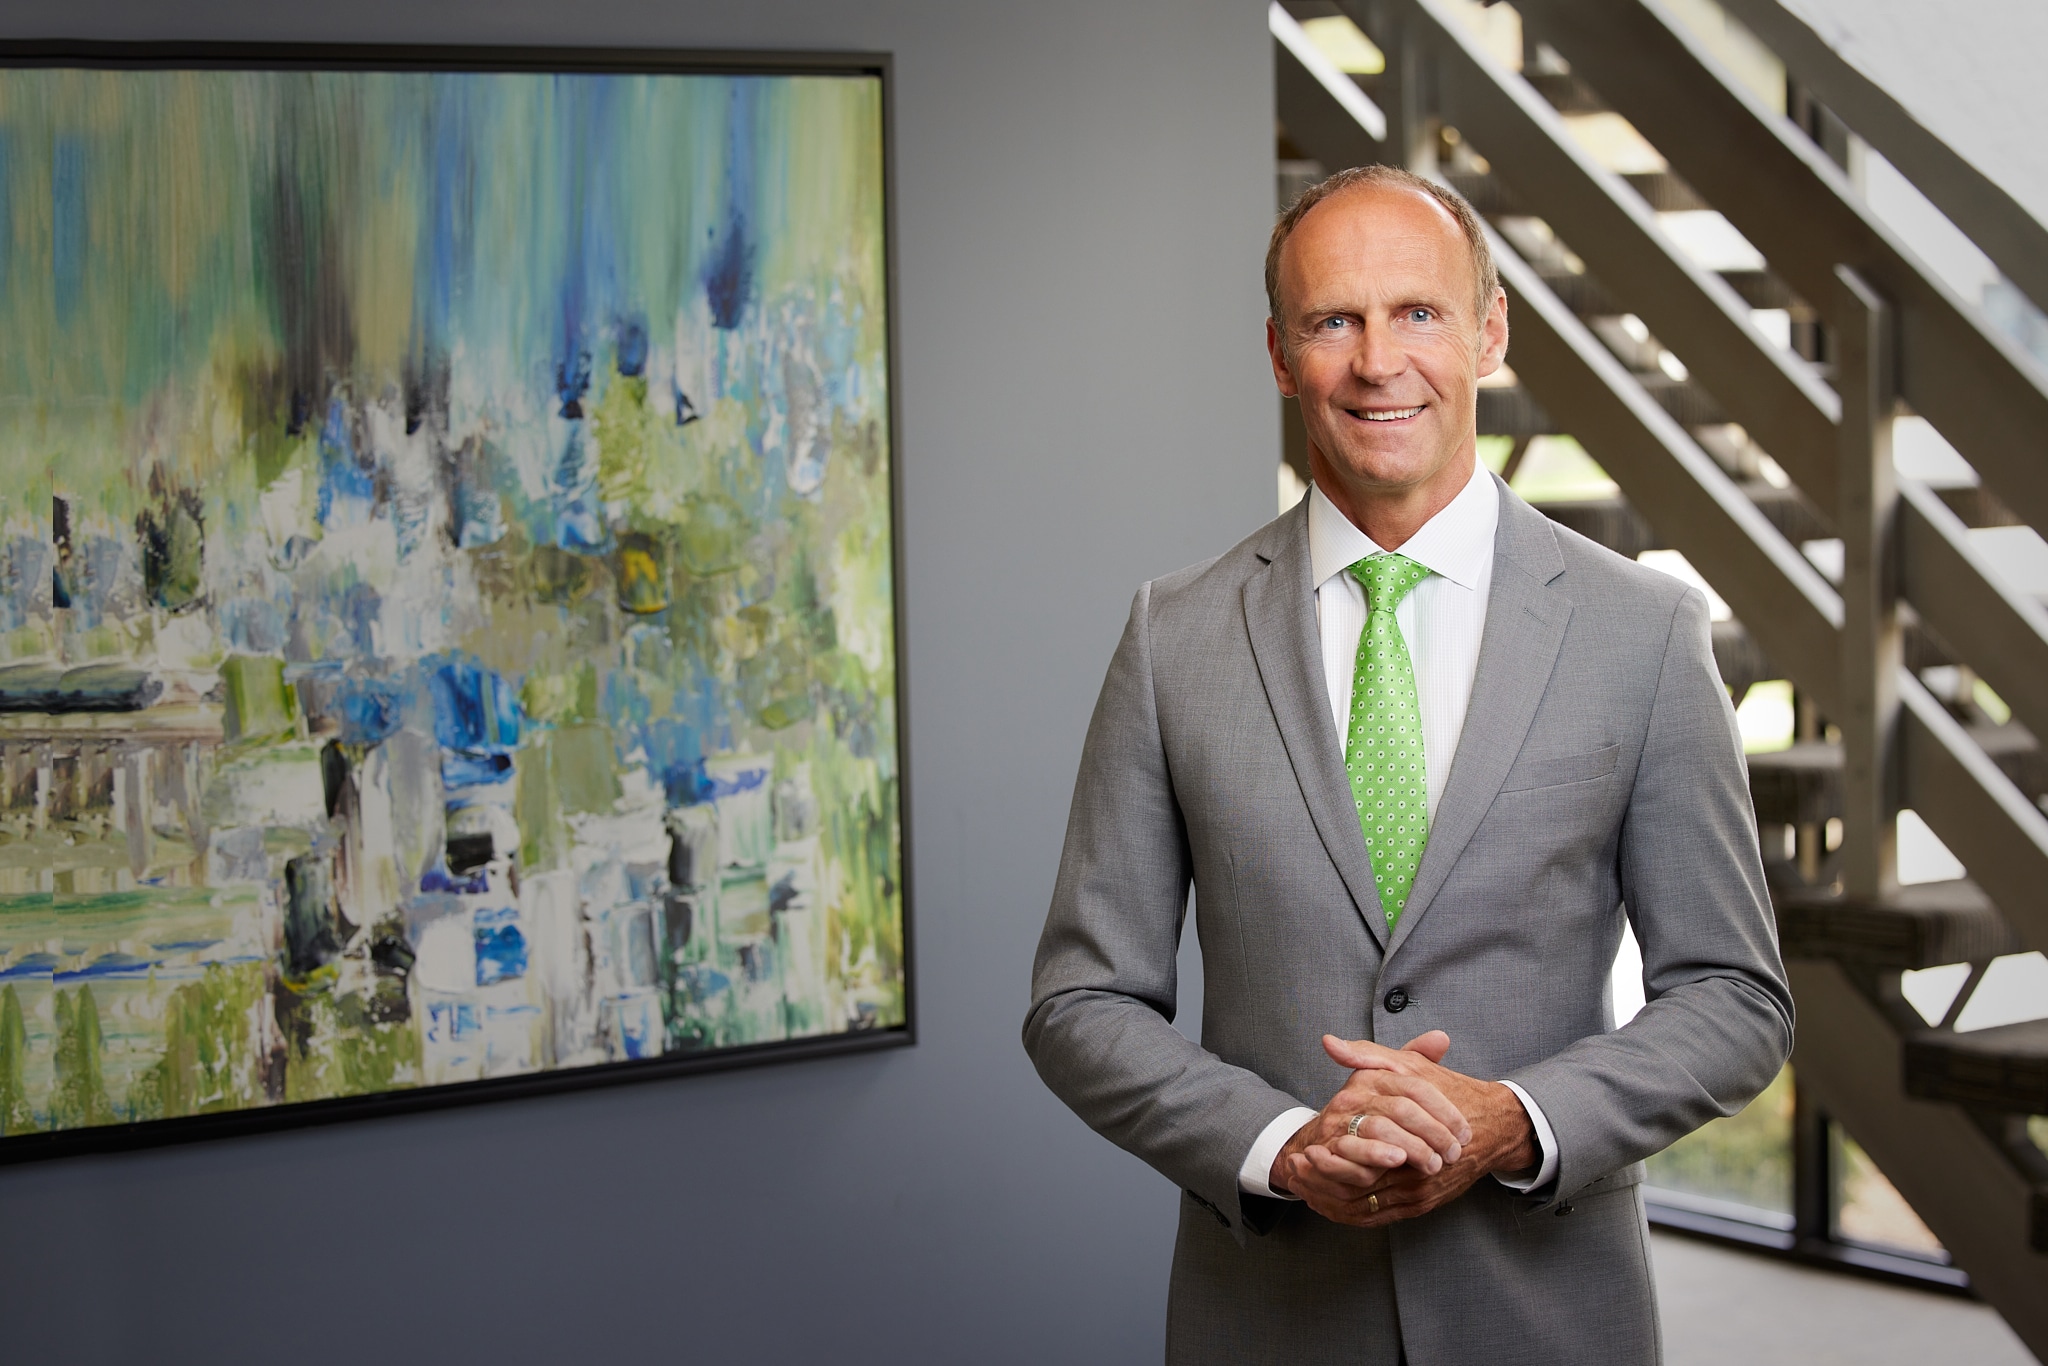 An image of Gareth Whiteside, the Wealth Management leader at Ford Keast LLP in the London Ontario office